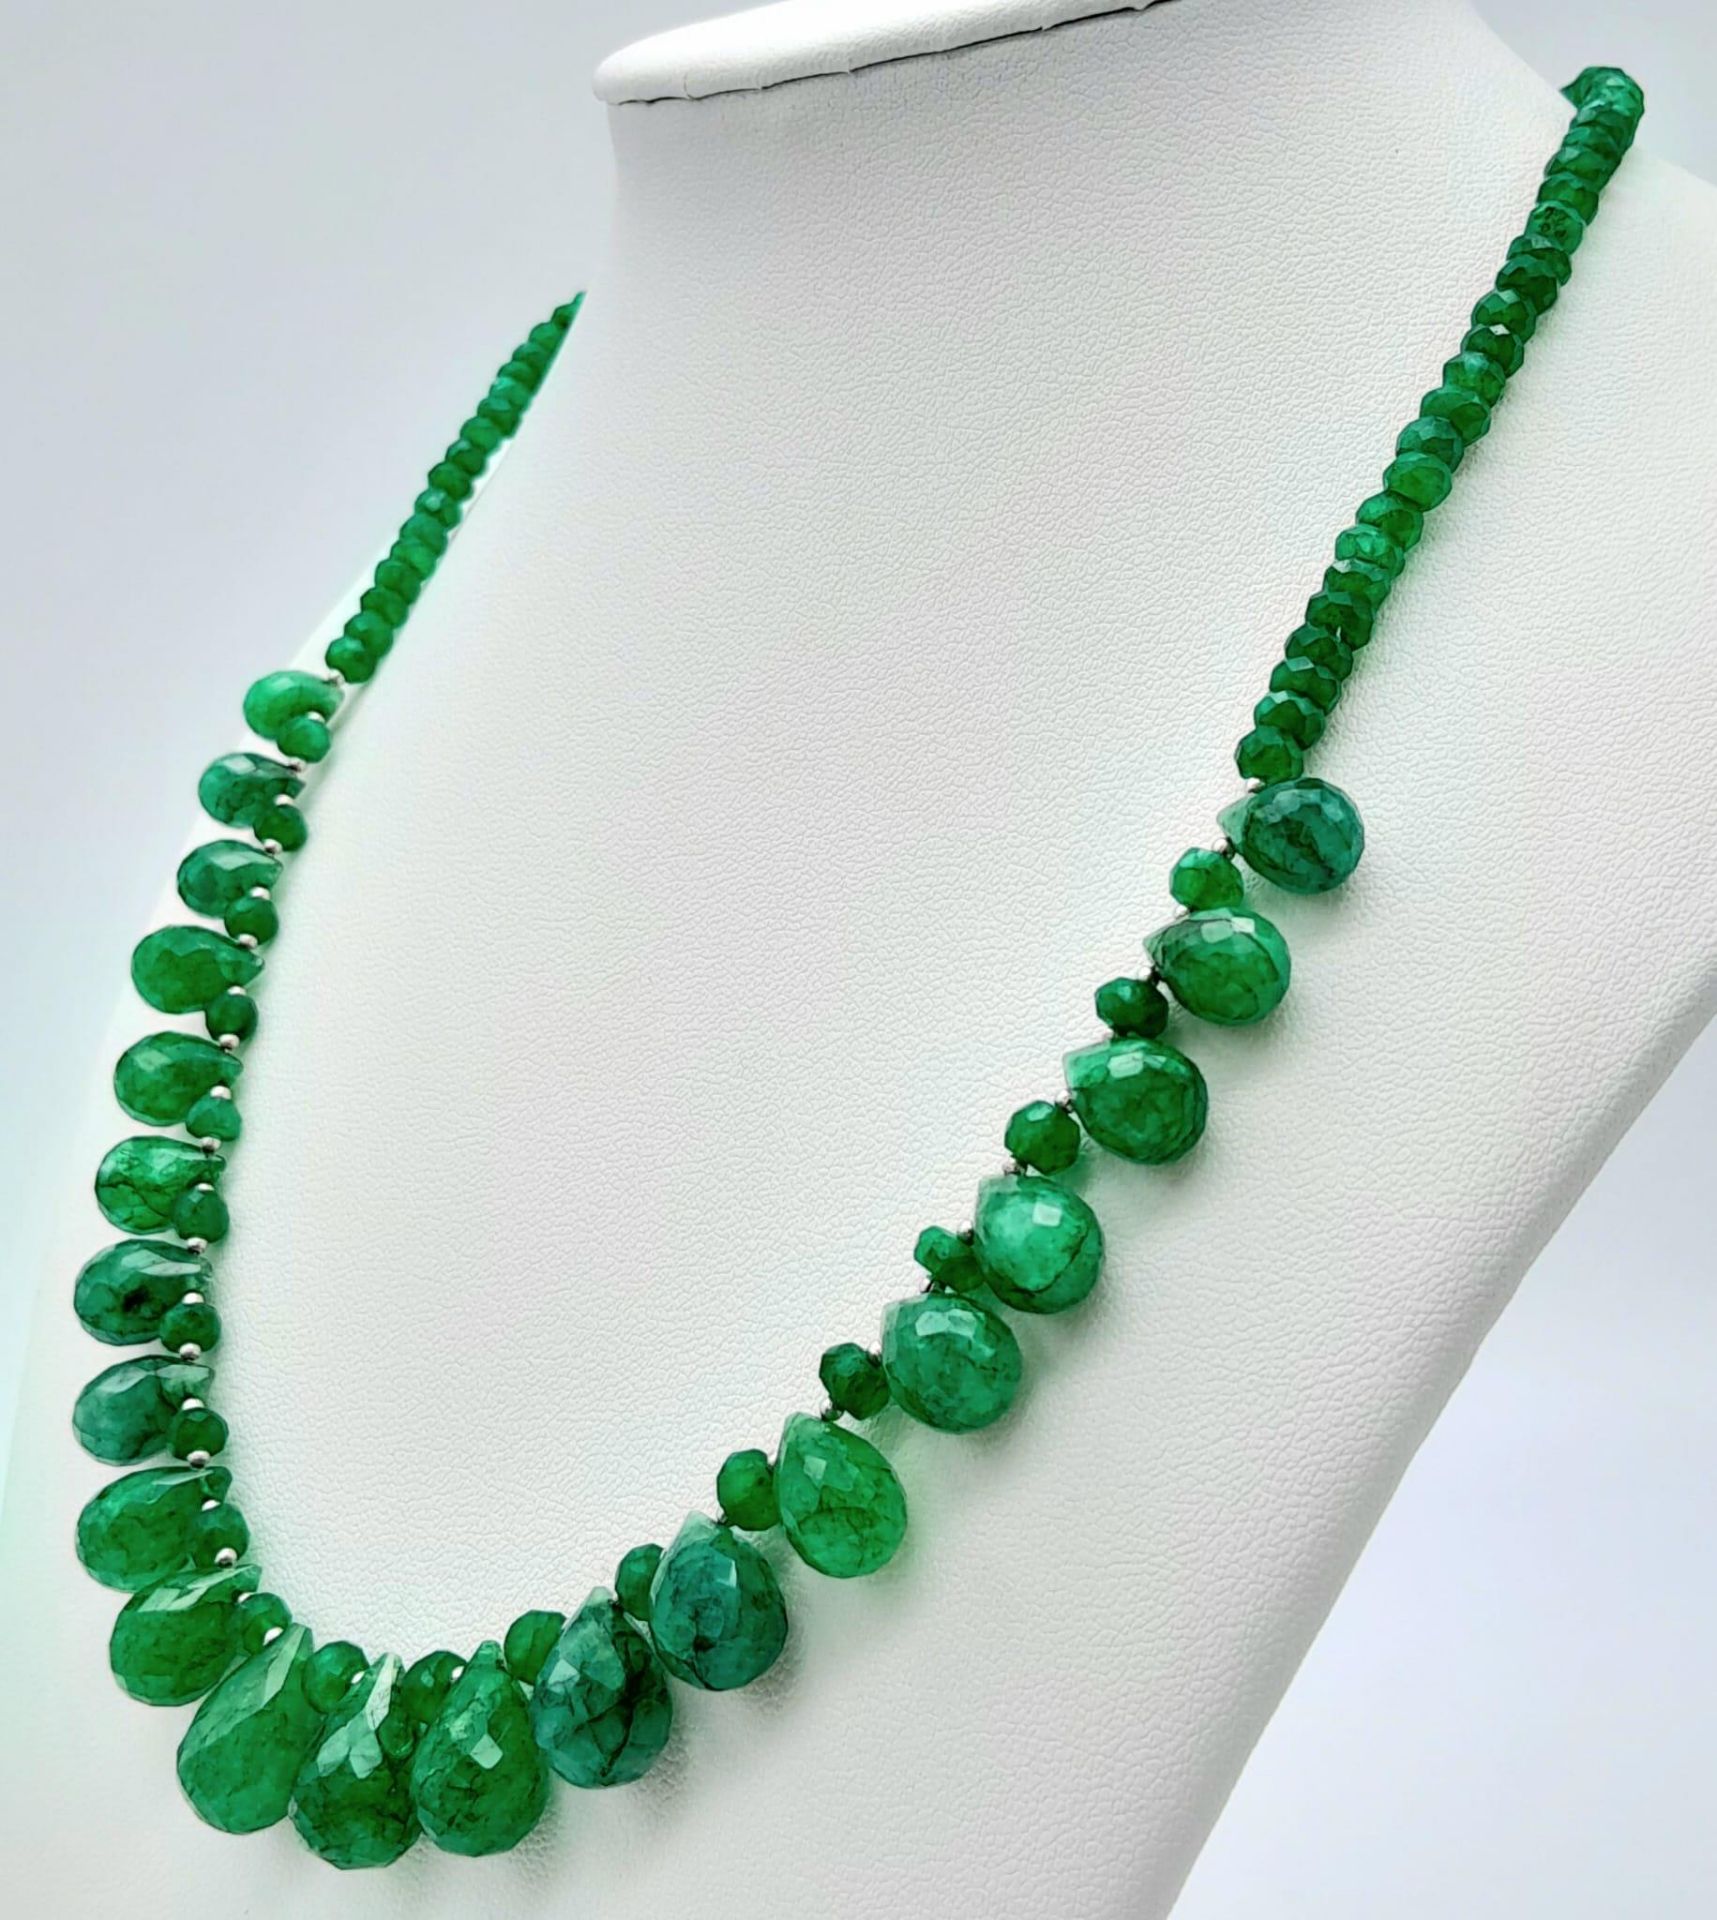 An Emerald Beaded Necklace with Emerald Teardrops and 925 Silver Clasp. 165ctw emeralds, 45.5cm - Image 2 of 4